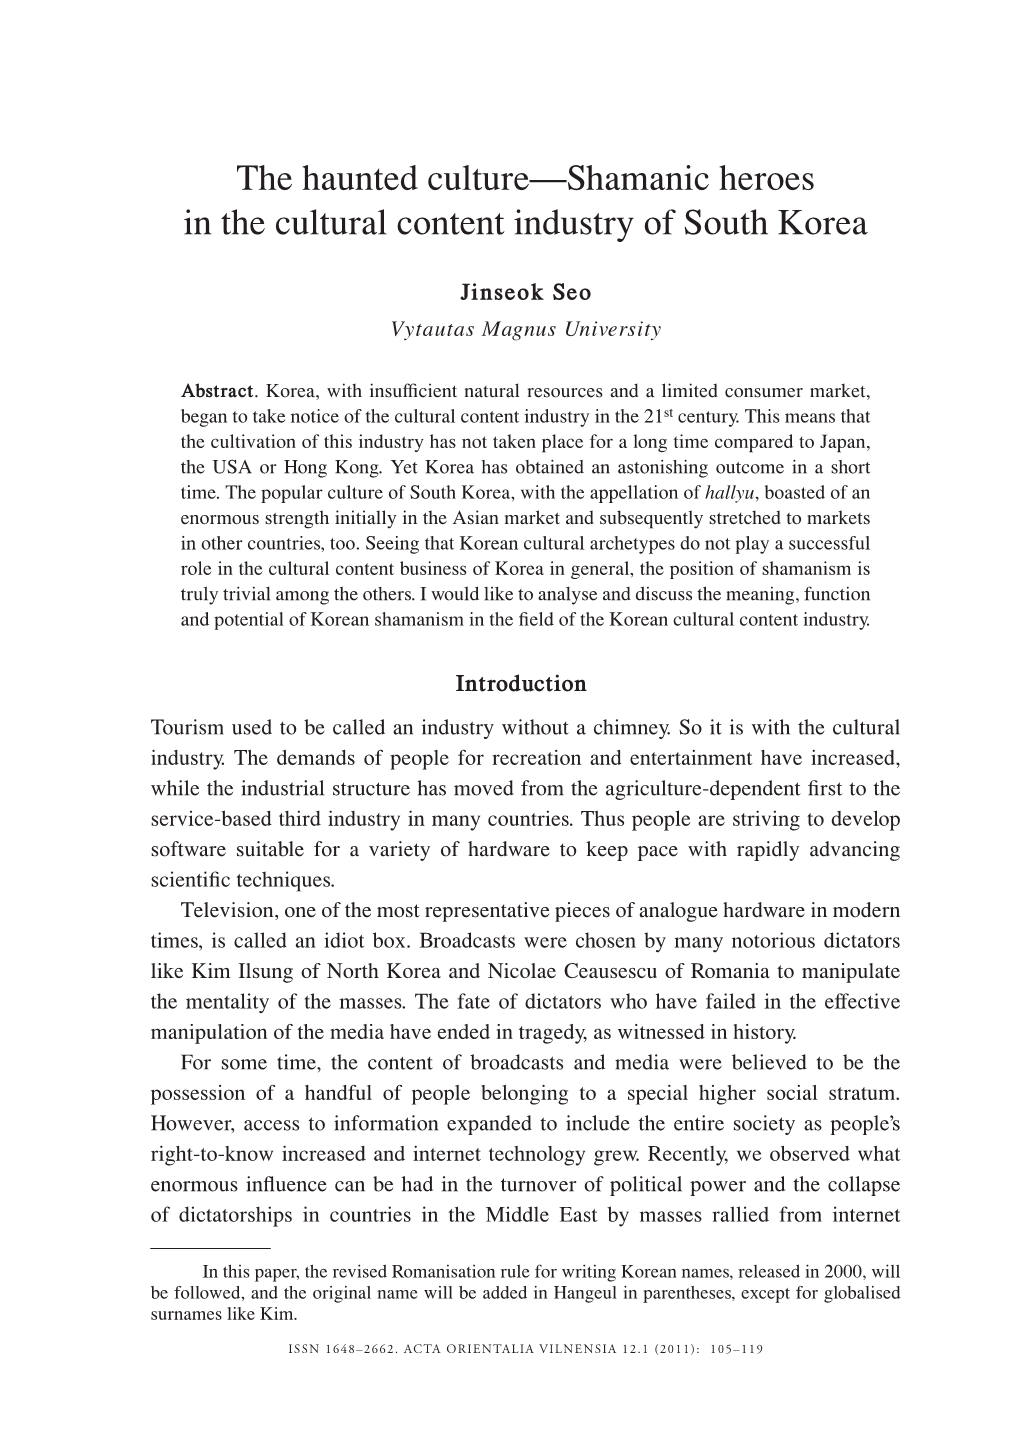 The Haunted Culture—Shamanic Heroes in the Cultural Content Industry of South Korea